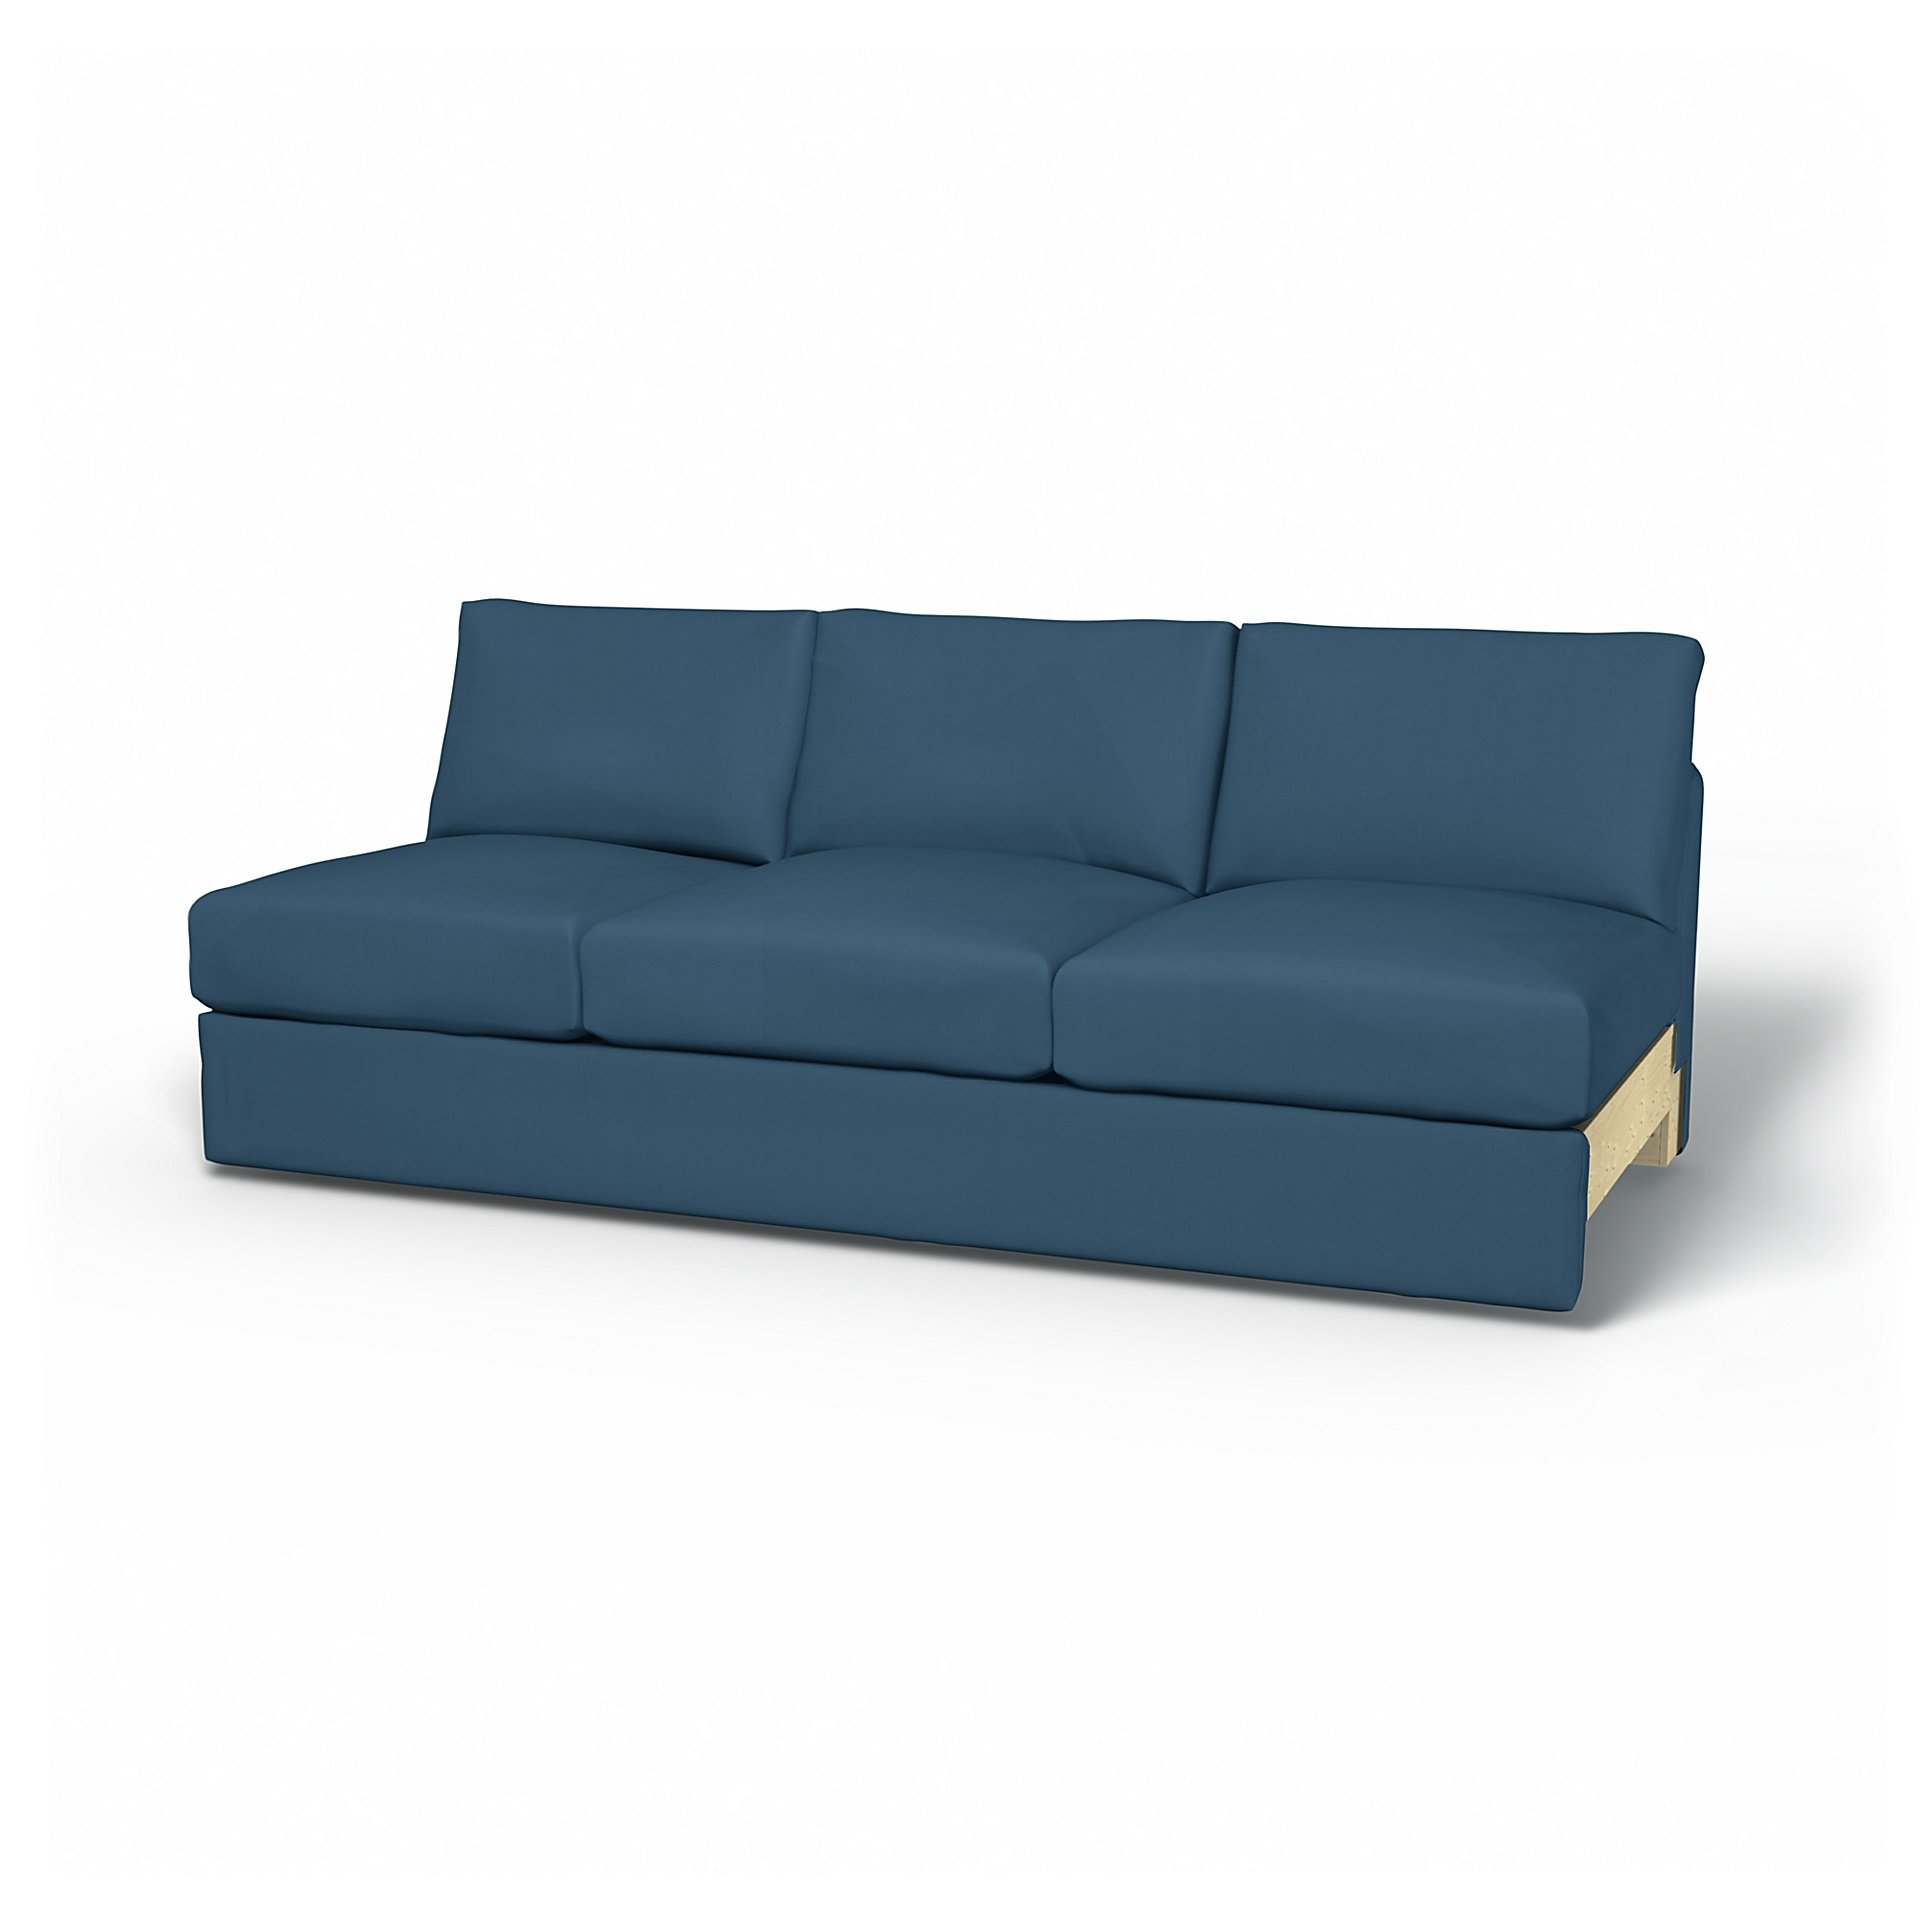 IKEA - Vimle 3 Seat Section Cover, Real Teal, Cotton - Bemz